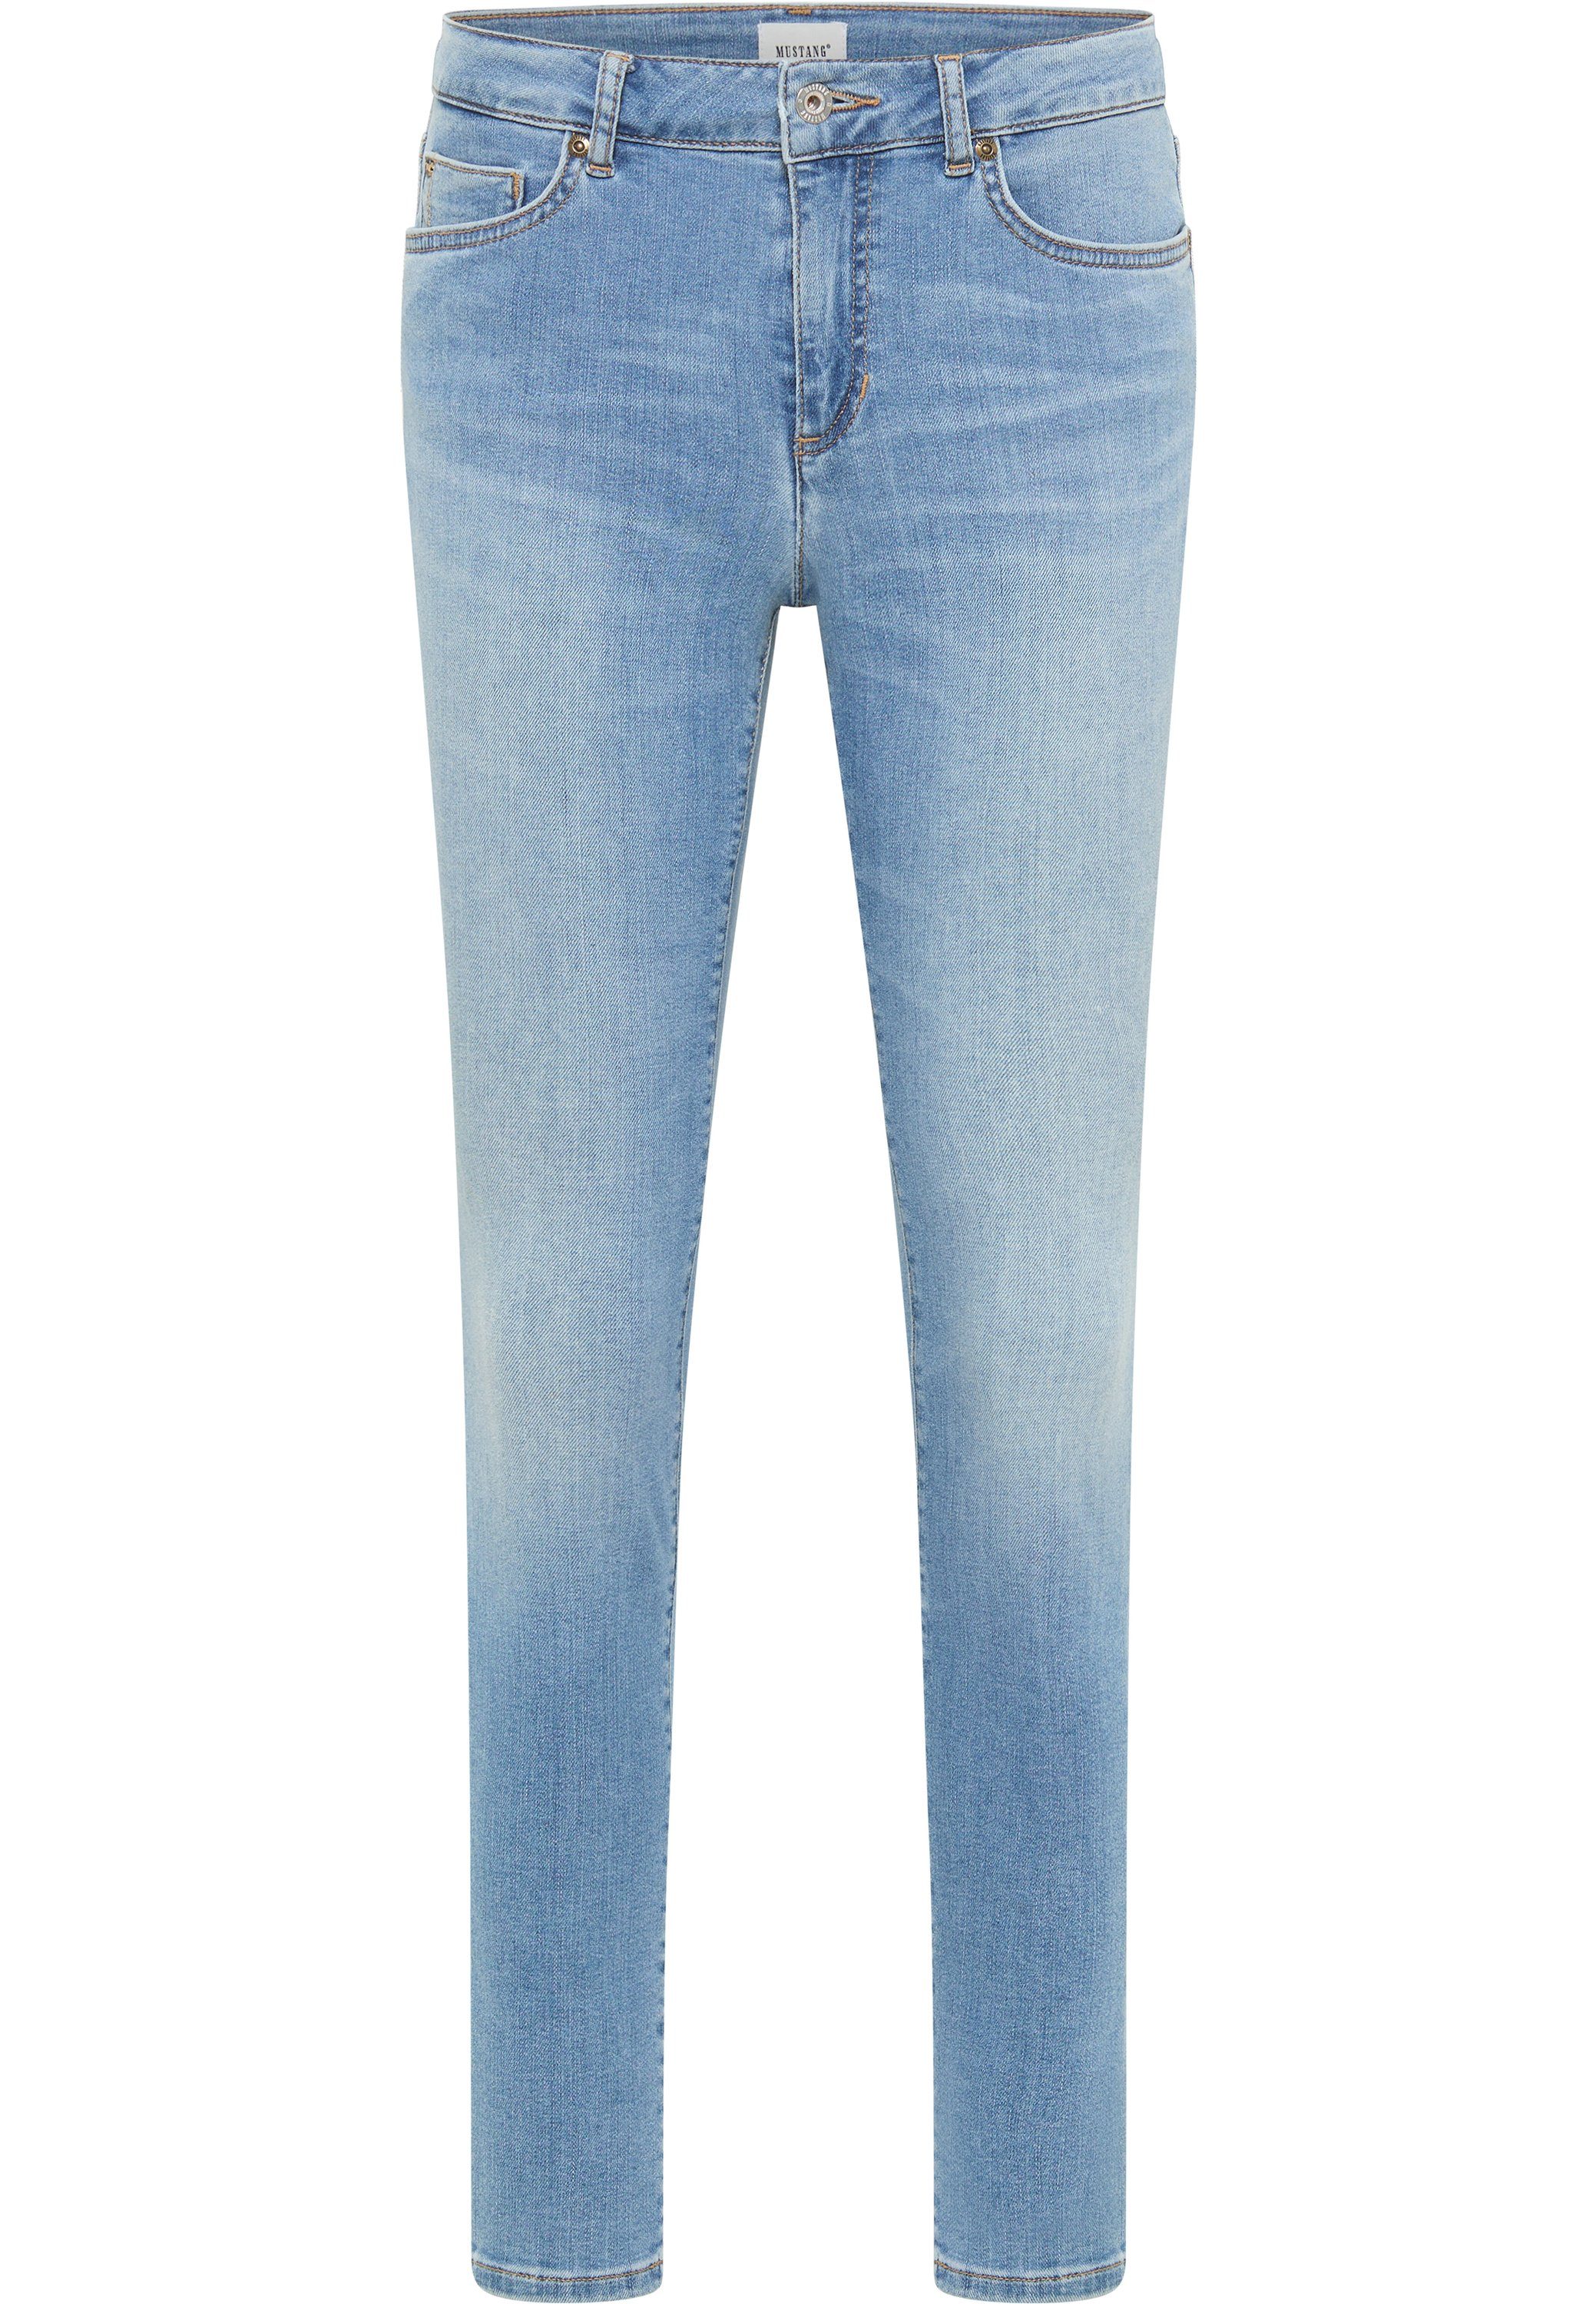 Mustang Skinny fit jeans